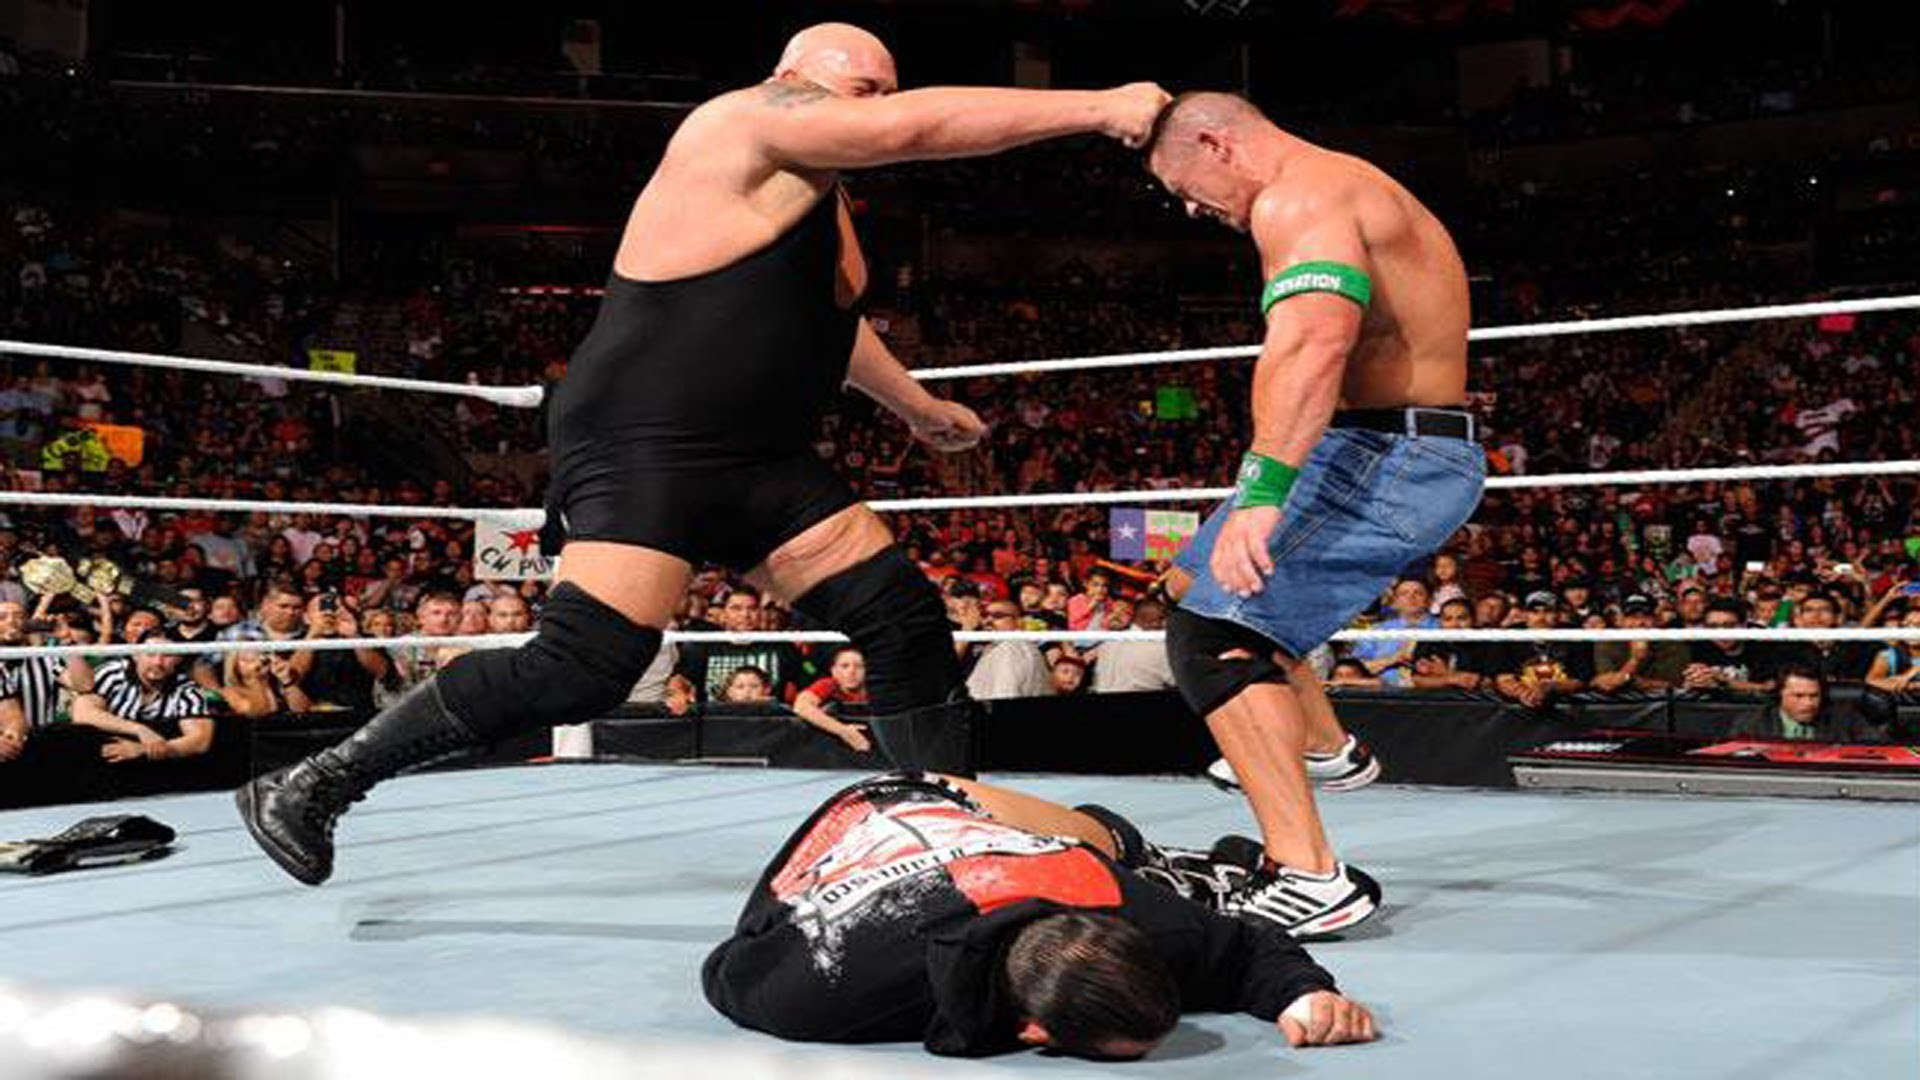 1920x1080 Big Show and John Cena Fight in WWE HD Wallpapers of Wrestler